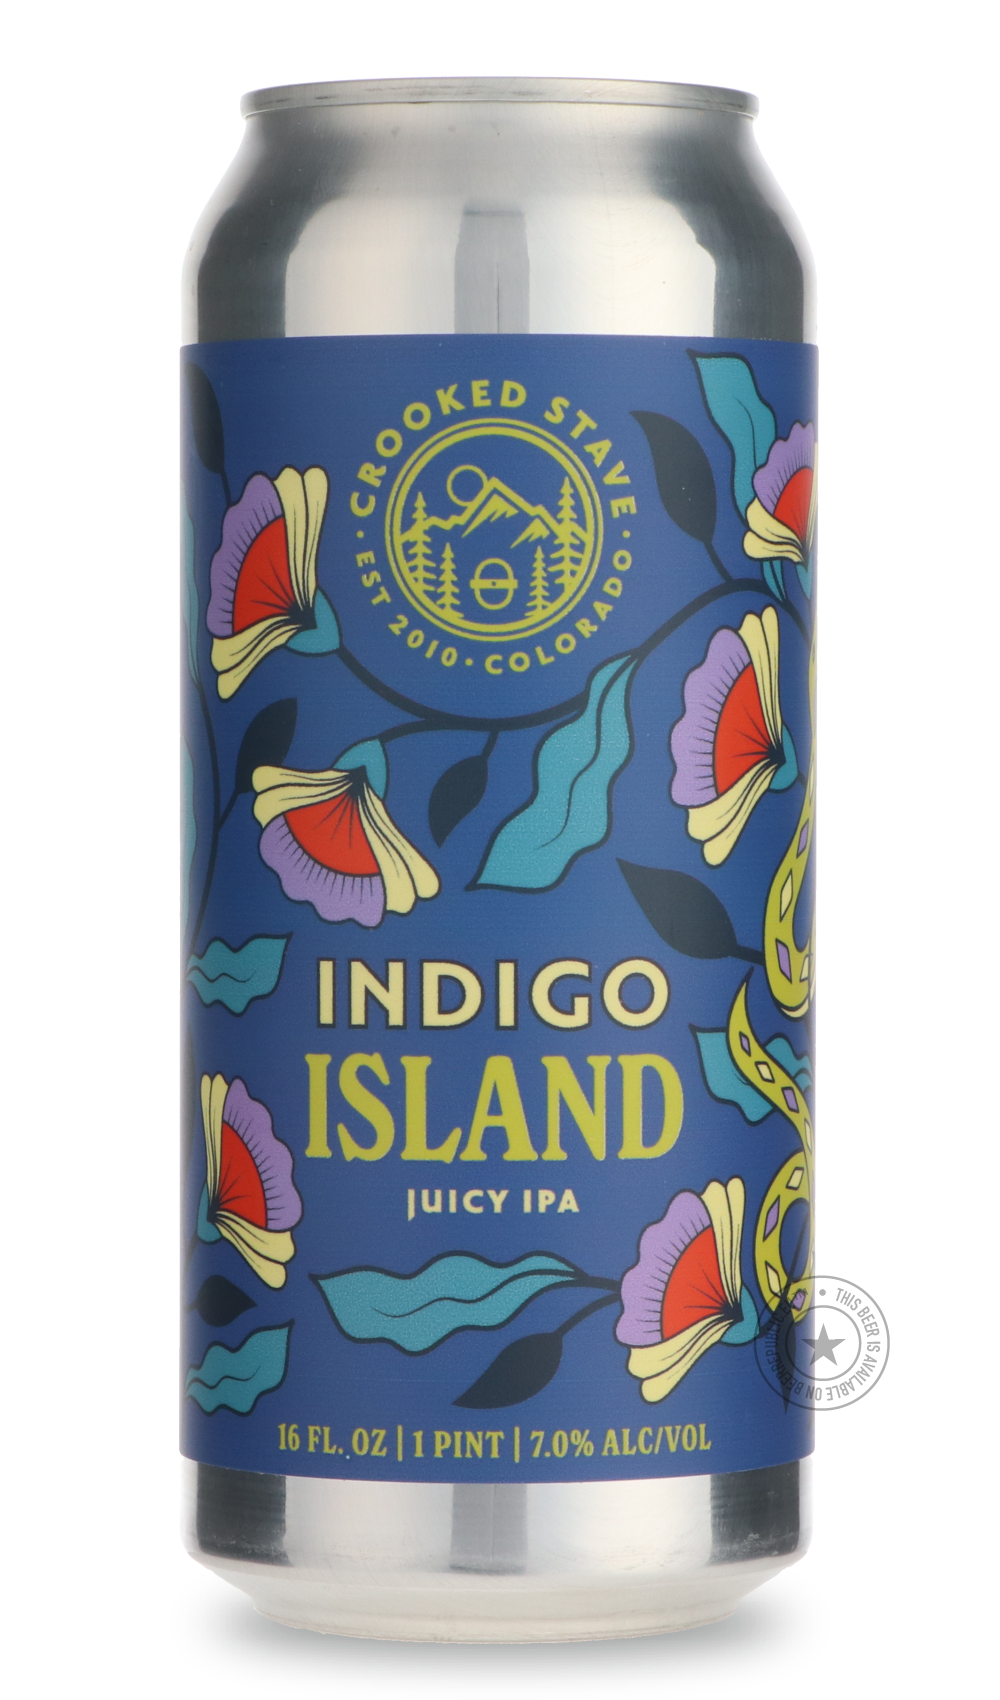 -Crooked Stave- Indigo Island-Sour / Wild & Fruity- Only @ Beer Republic - The best online beer store for American & Canadian craft beer - Buy beer online from the USA and Canada - Bier online kopen - Amerikaans bier kopen - Craft beer store - Craft beer kopen - Amerikanisch bier kaufen - Bier online kaufen - Acheter biere online - IPA - Stout - Porter - New England IPA - Hazy IPA - Imperial Stout - Barrel Aged - Barrel Aged Imperial Stout - Brown - Dark beer - Blond - Blonde - Pilsner - Lager - Wheat - Wei